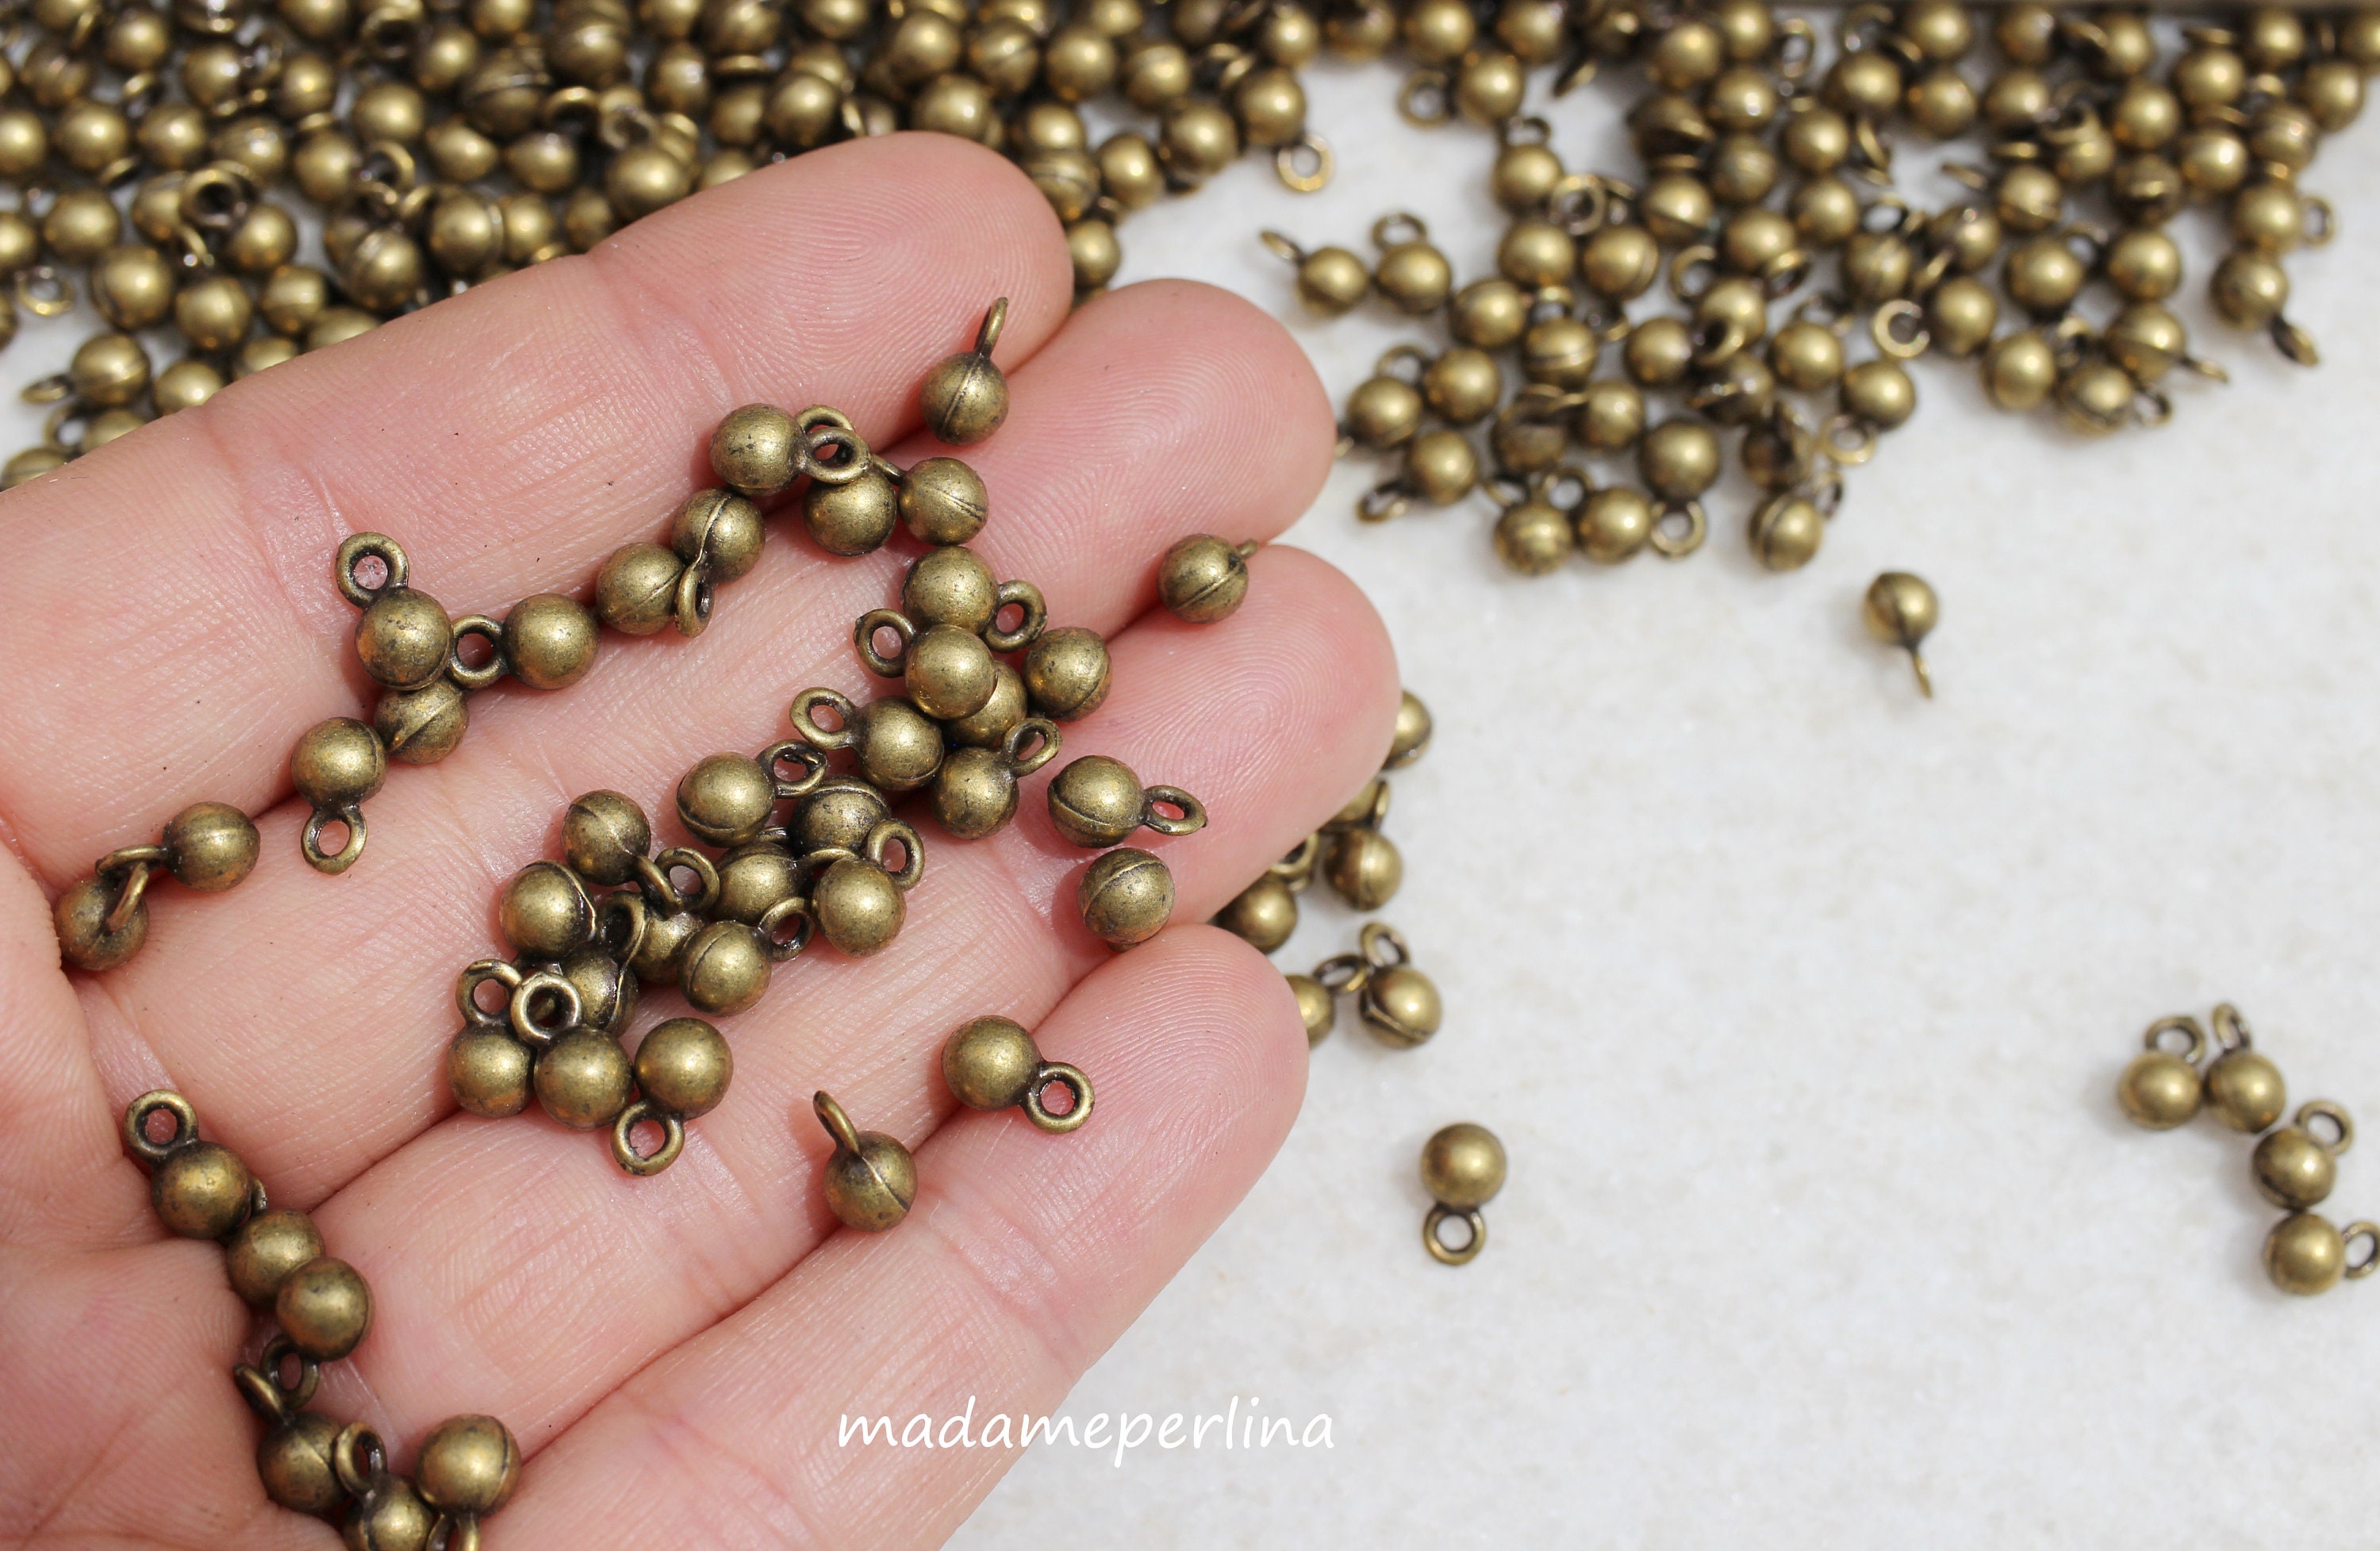 Round Gold Ball Drop Charms Jewelry Making Supplies Findings Metal